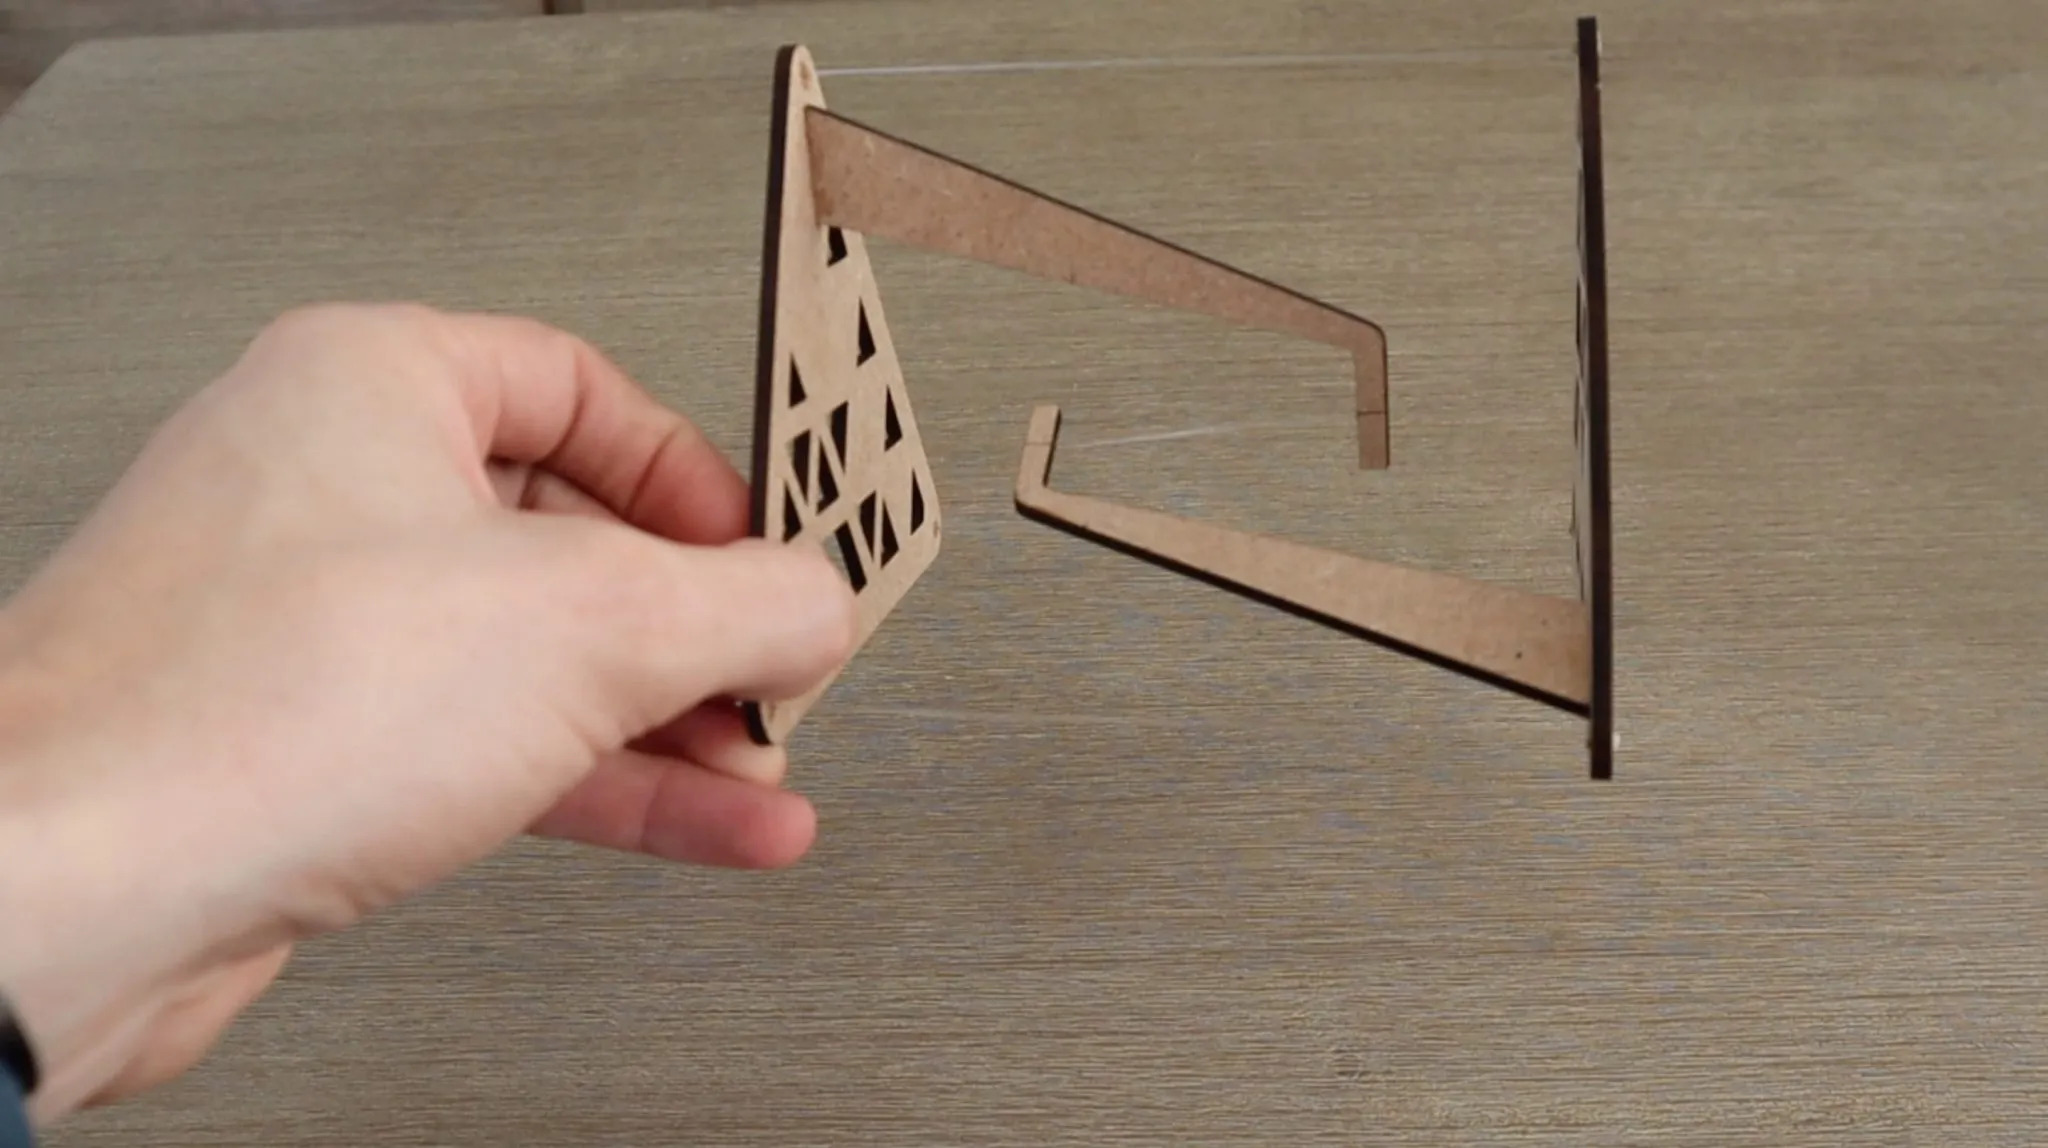 Laser Cut Impossible Table Tensegrity Table DXF File